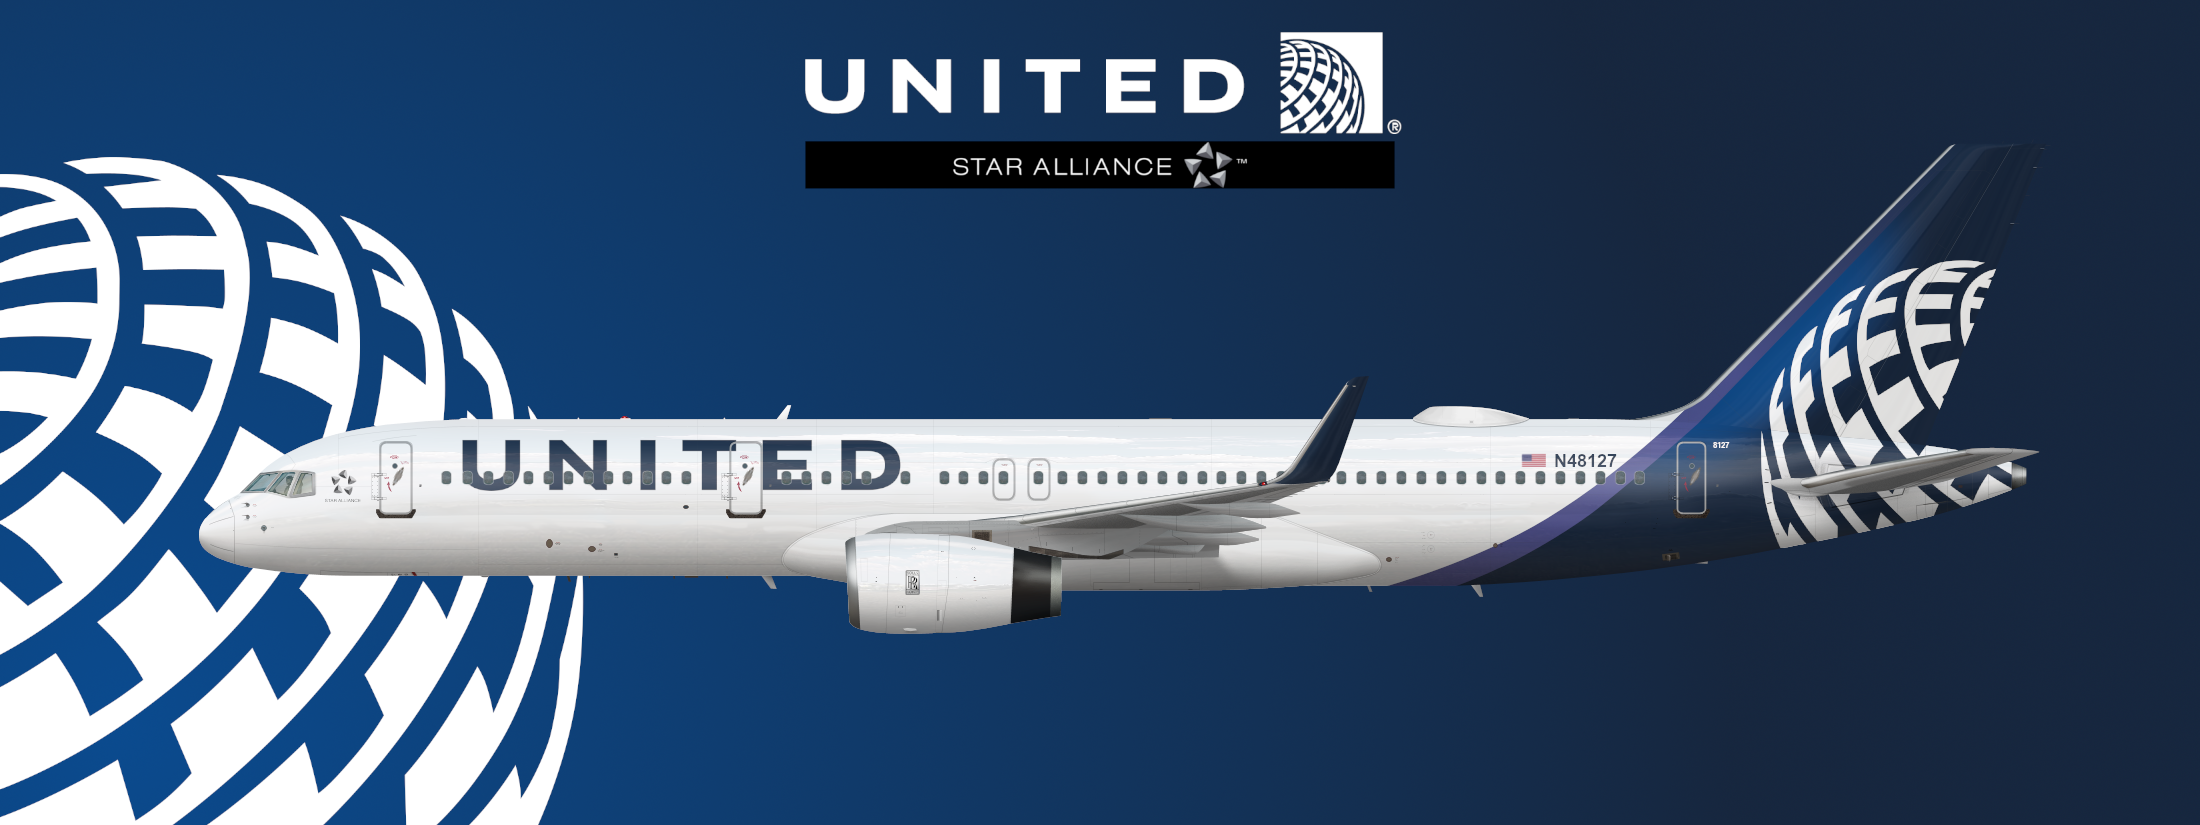 United Airlines New Livery Concept Boeing 757 200 Real World Liveries